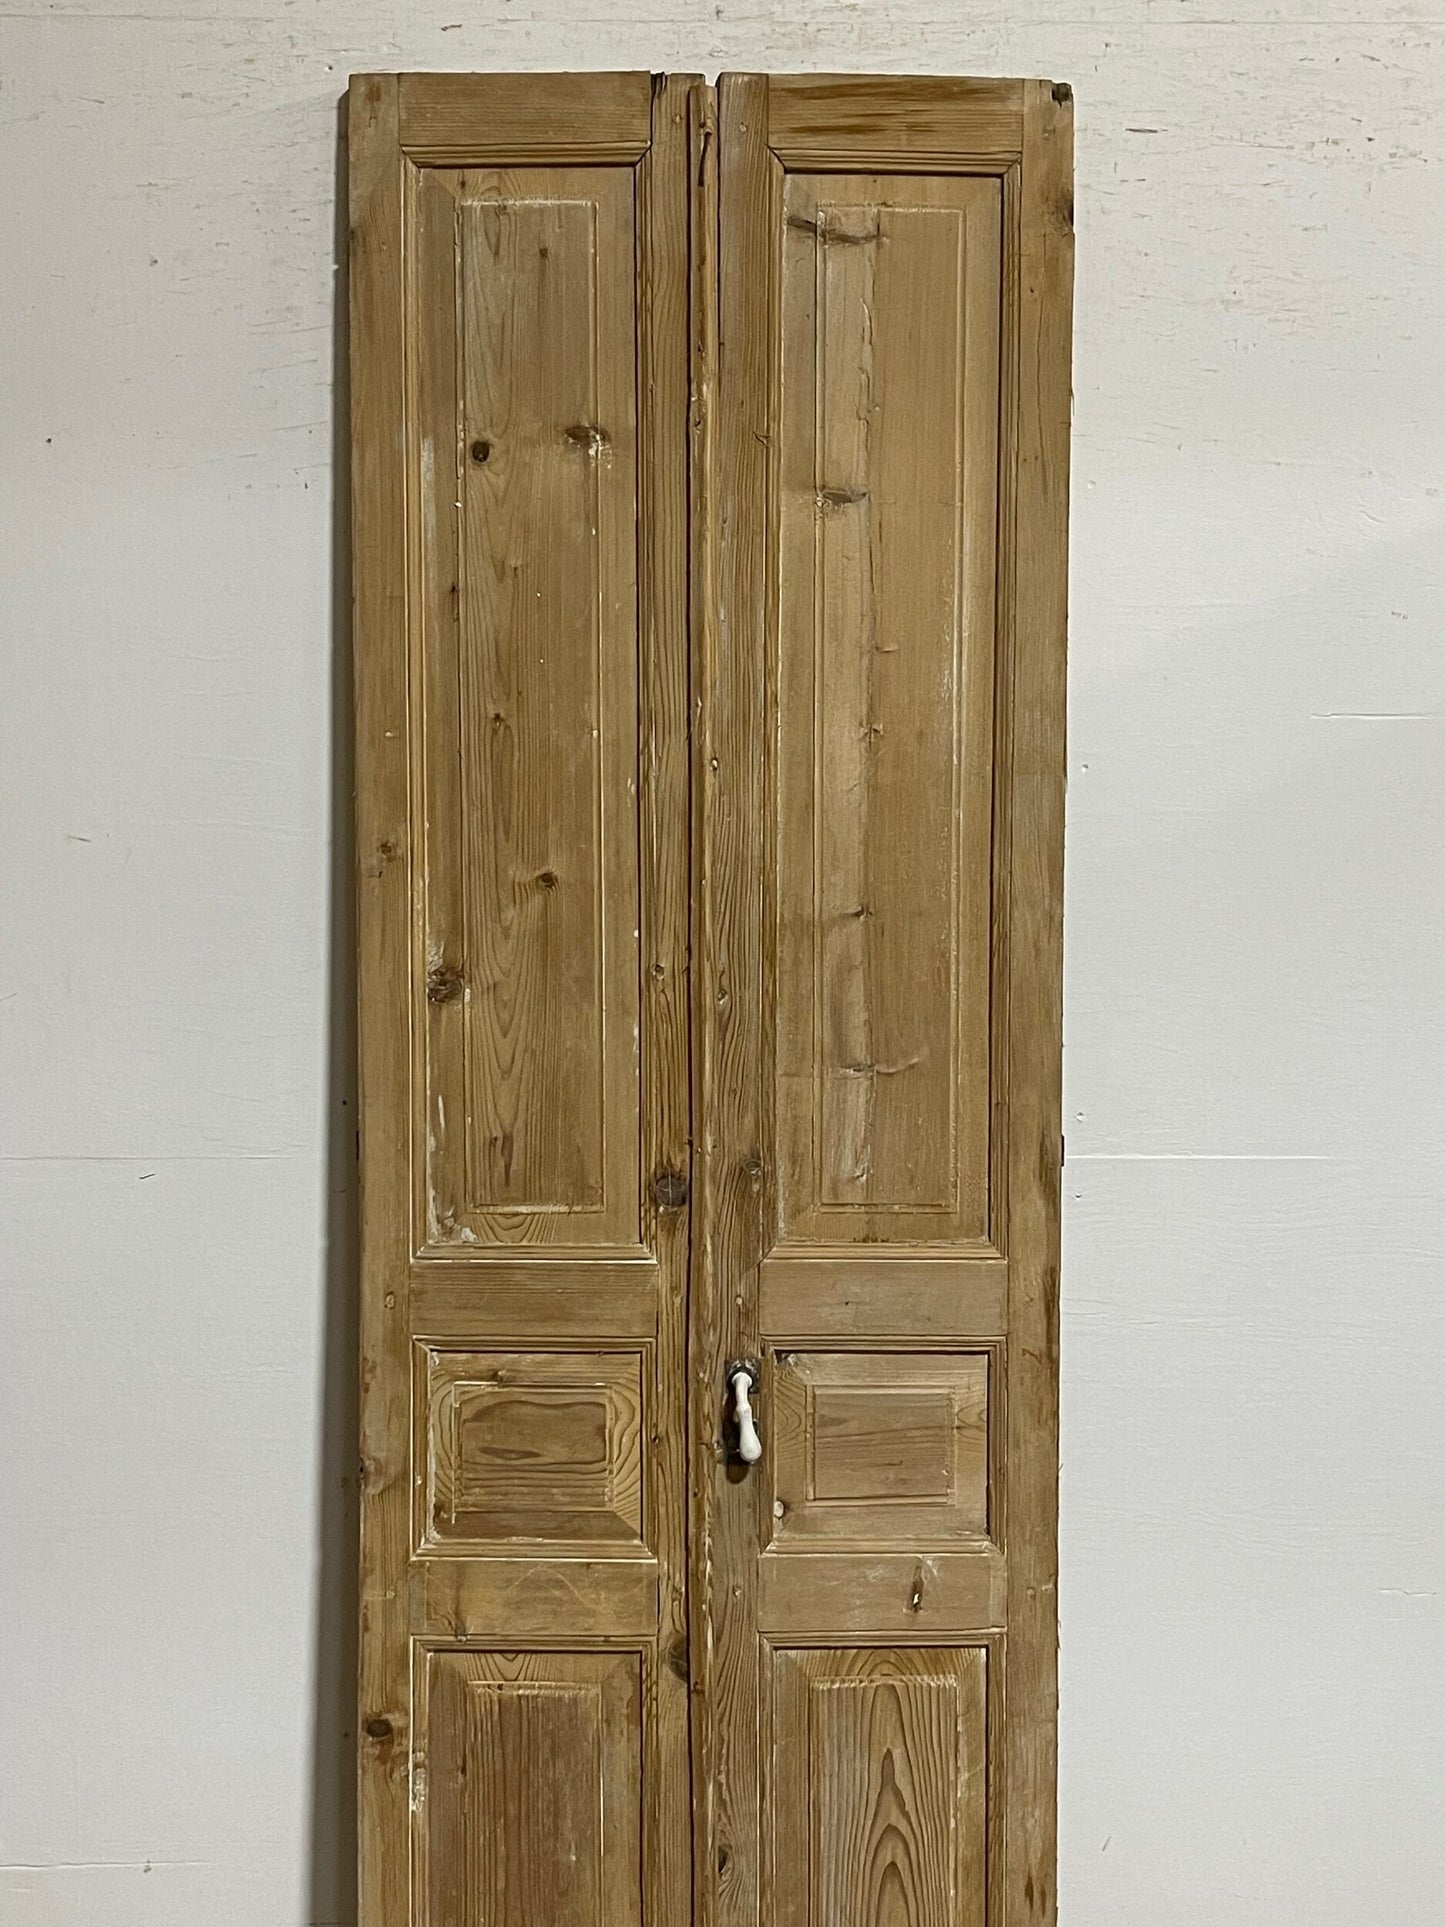 Antique French panel doors (93.5 x 29.5) I069a